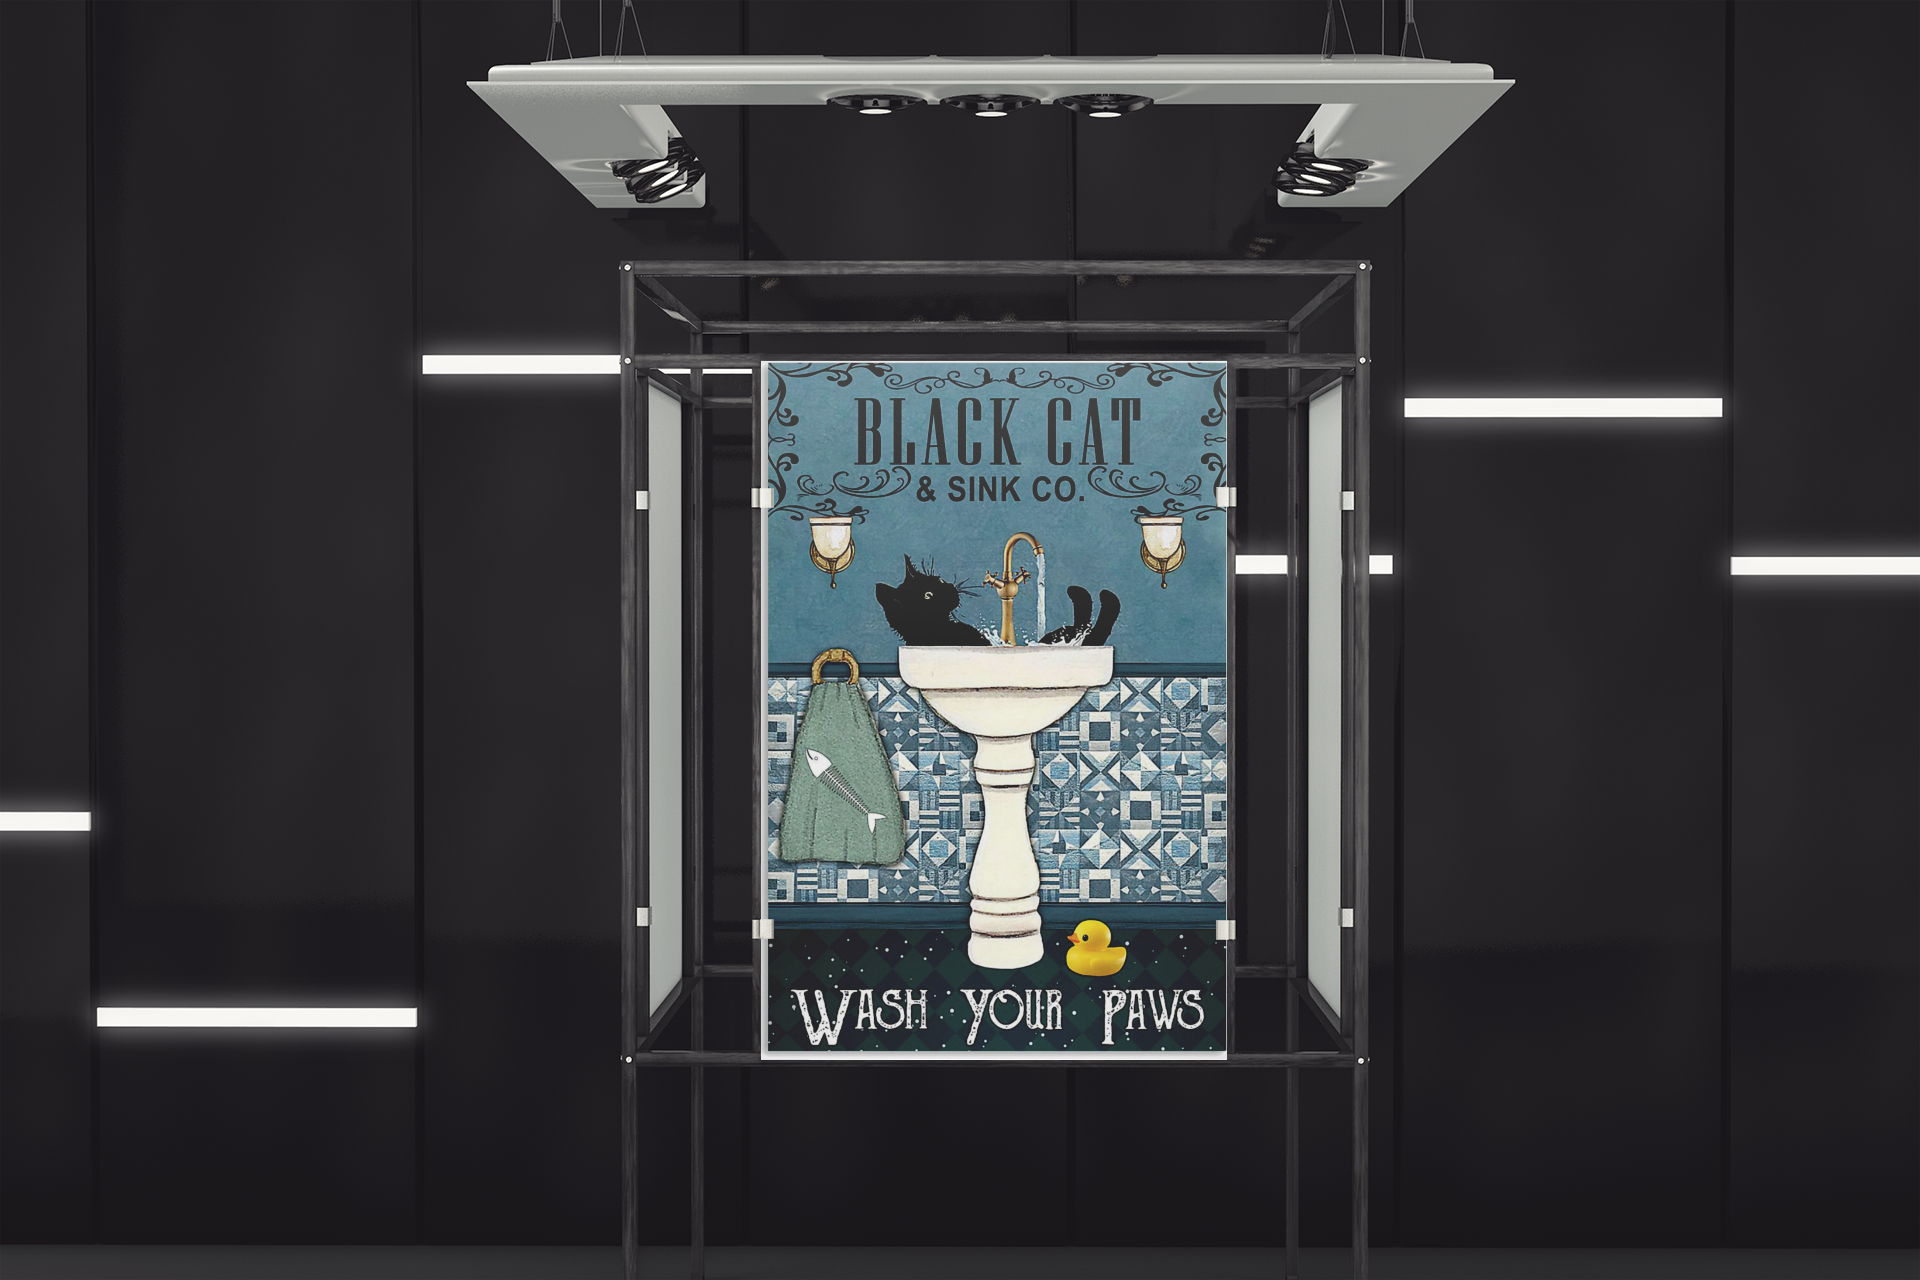 Black cat and sink co wash your paws poster 3